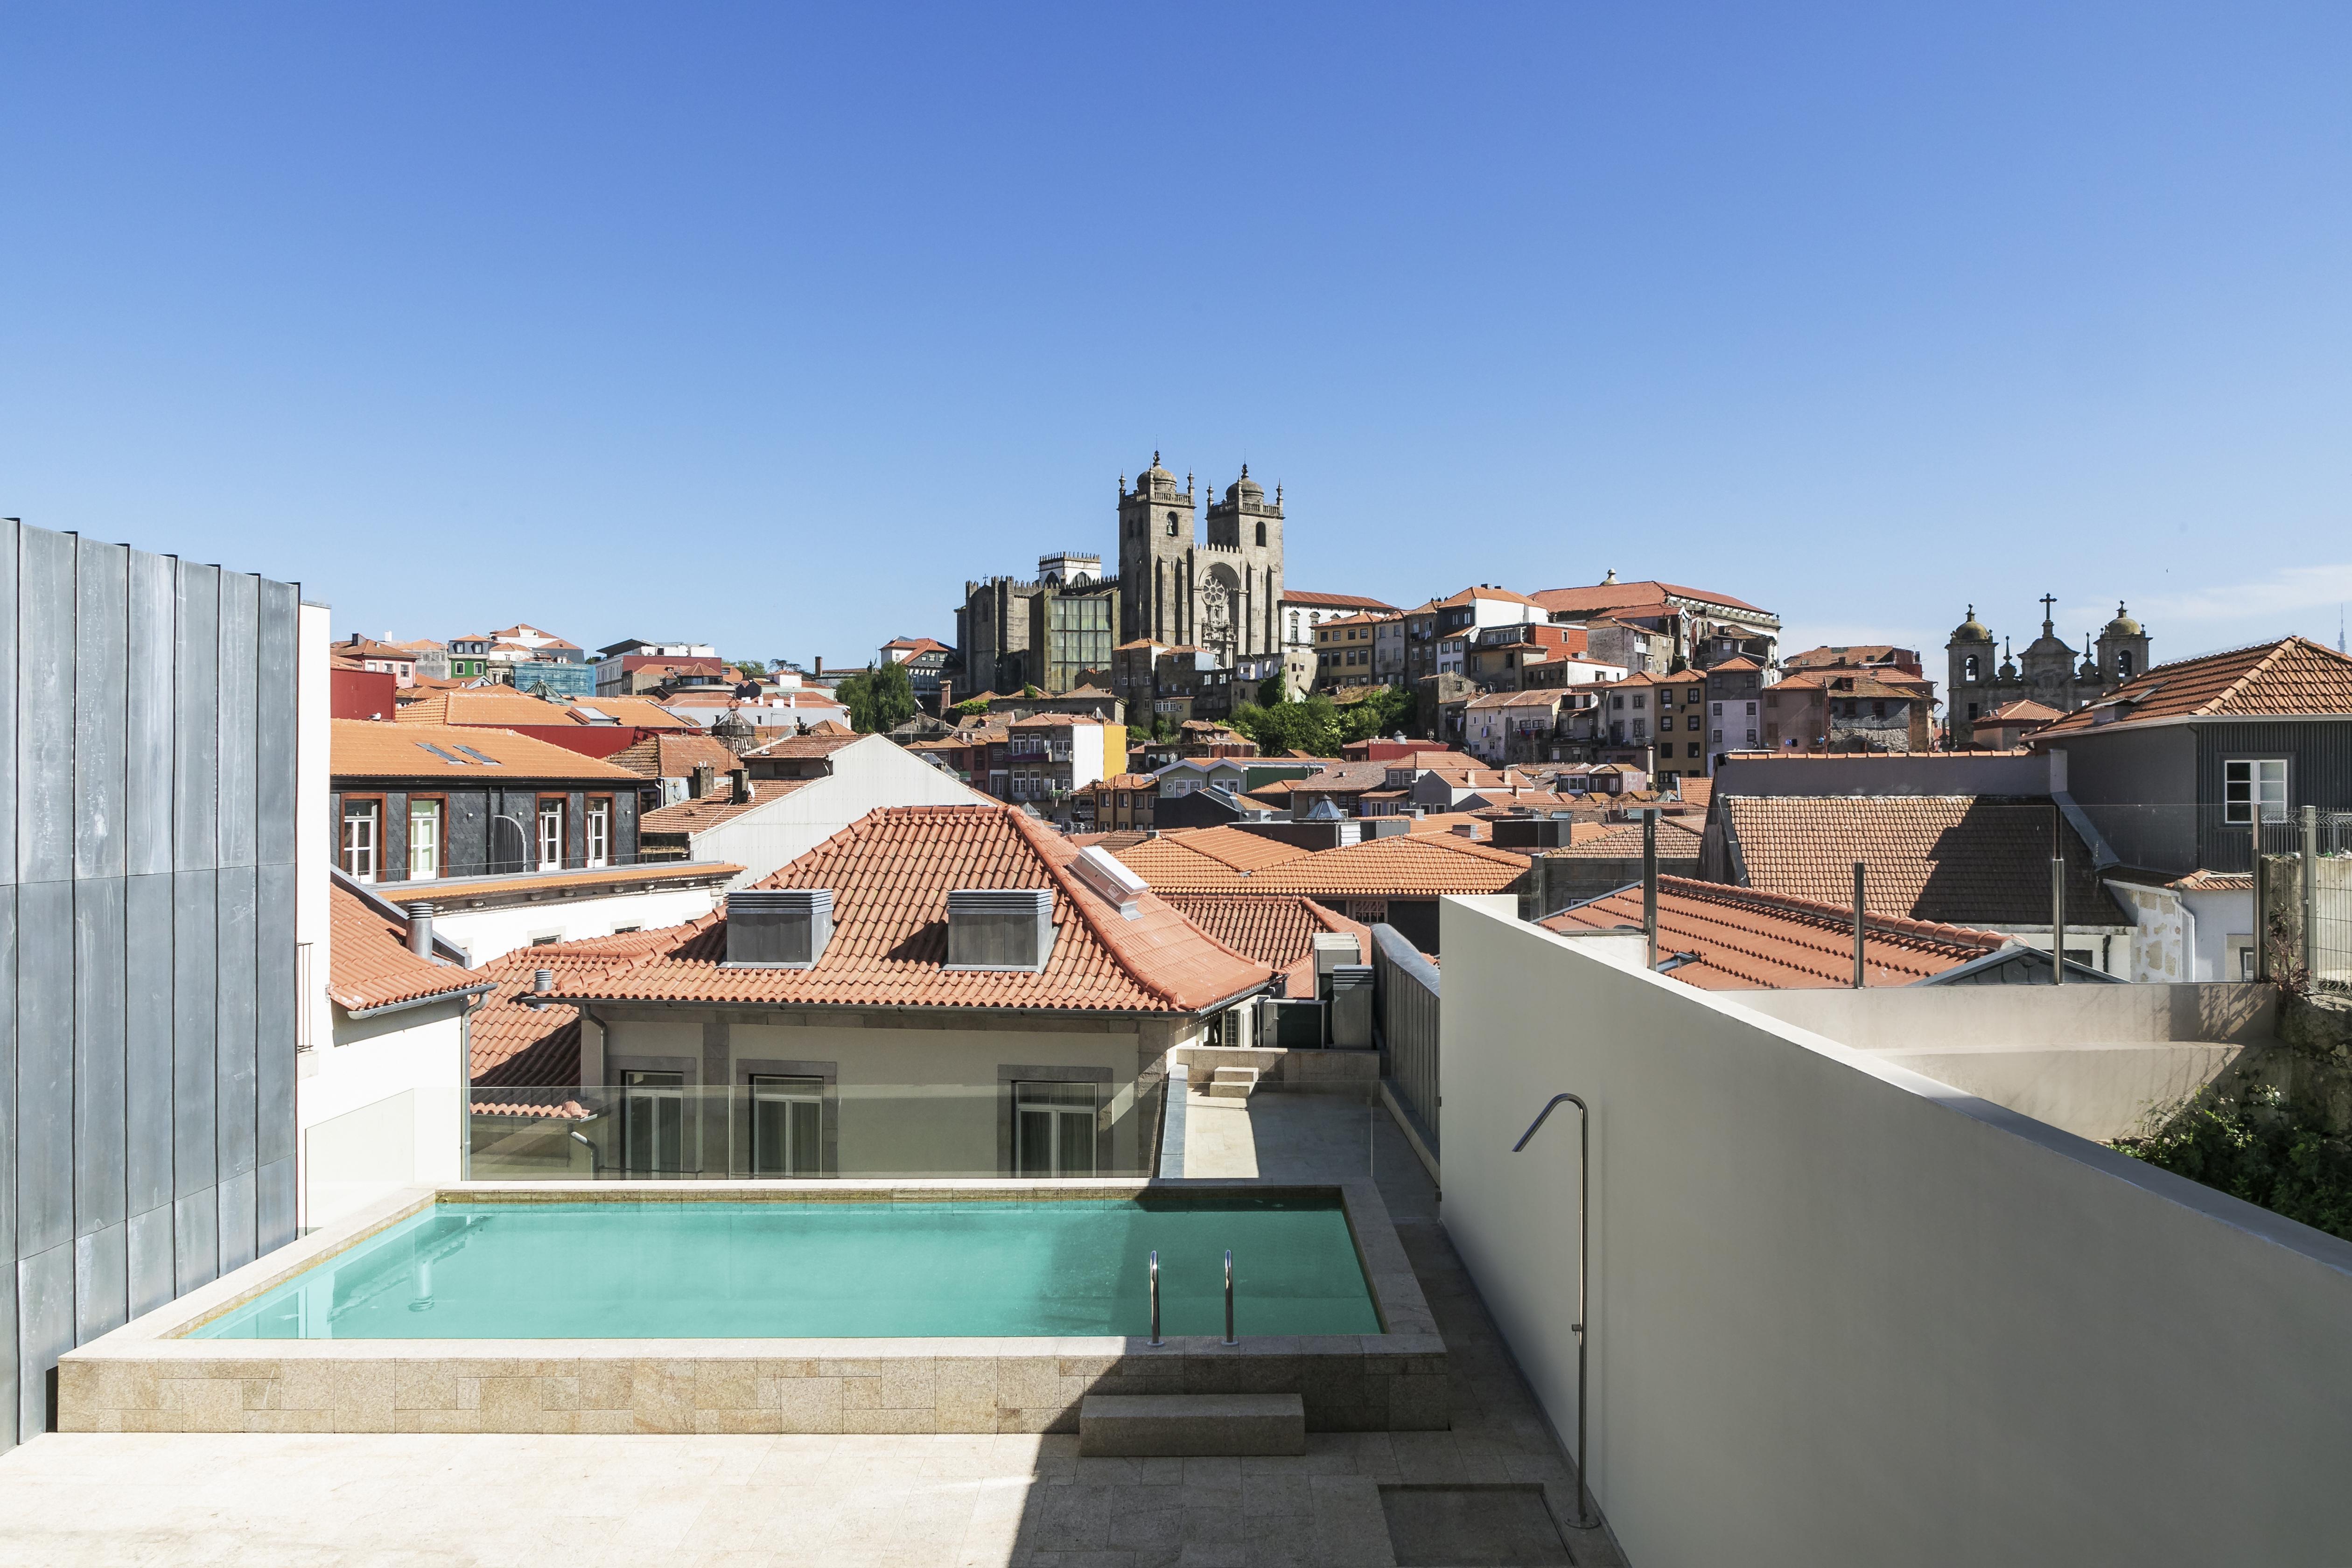 Unmissable Hotels in Porto